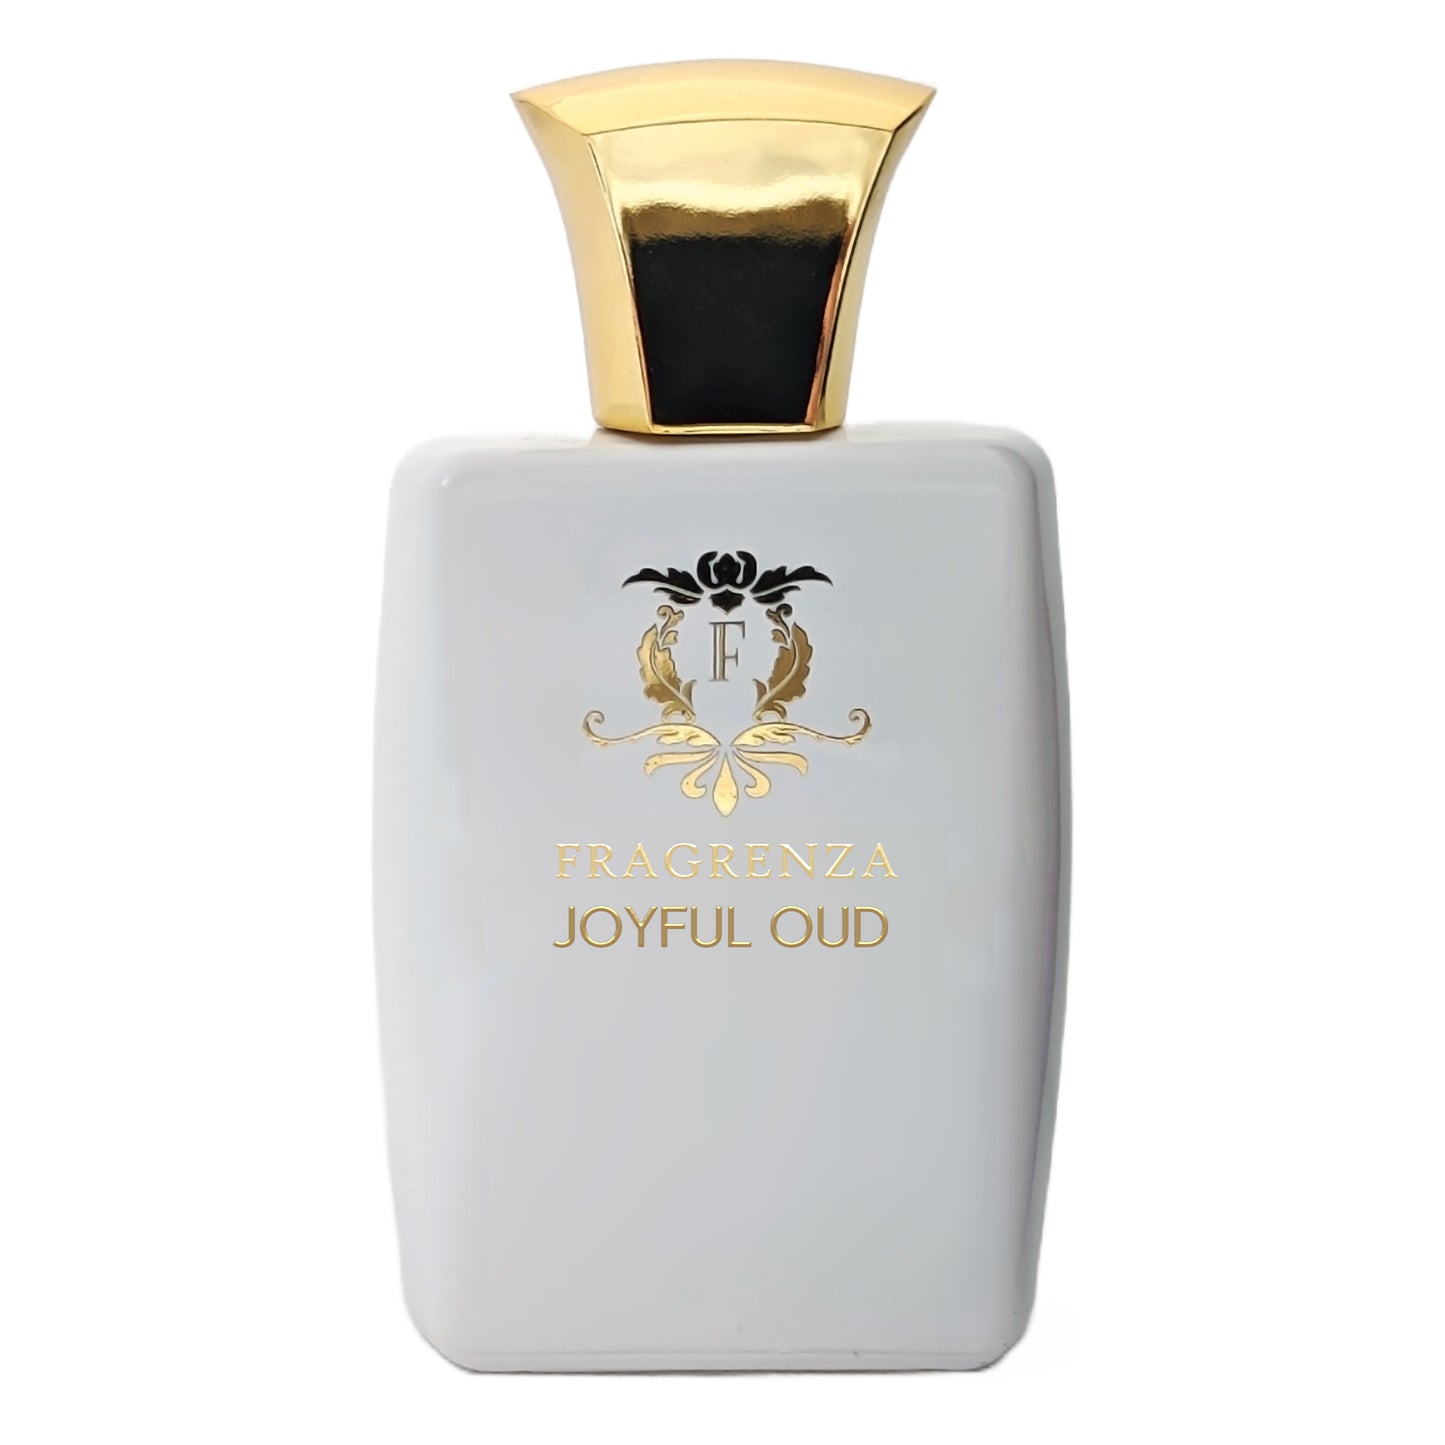 Initio Parfums Oud for Happiness dupe